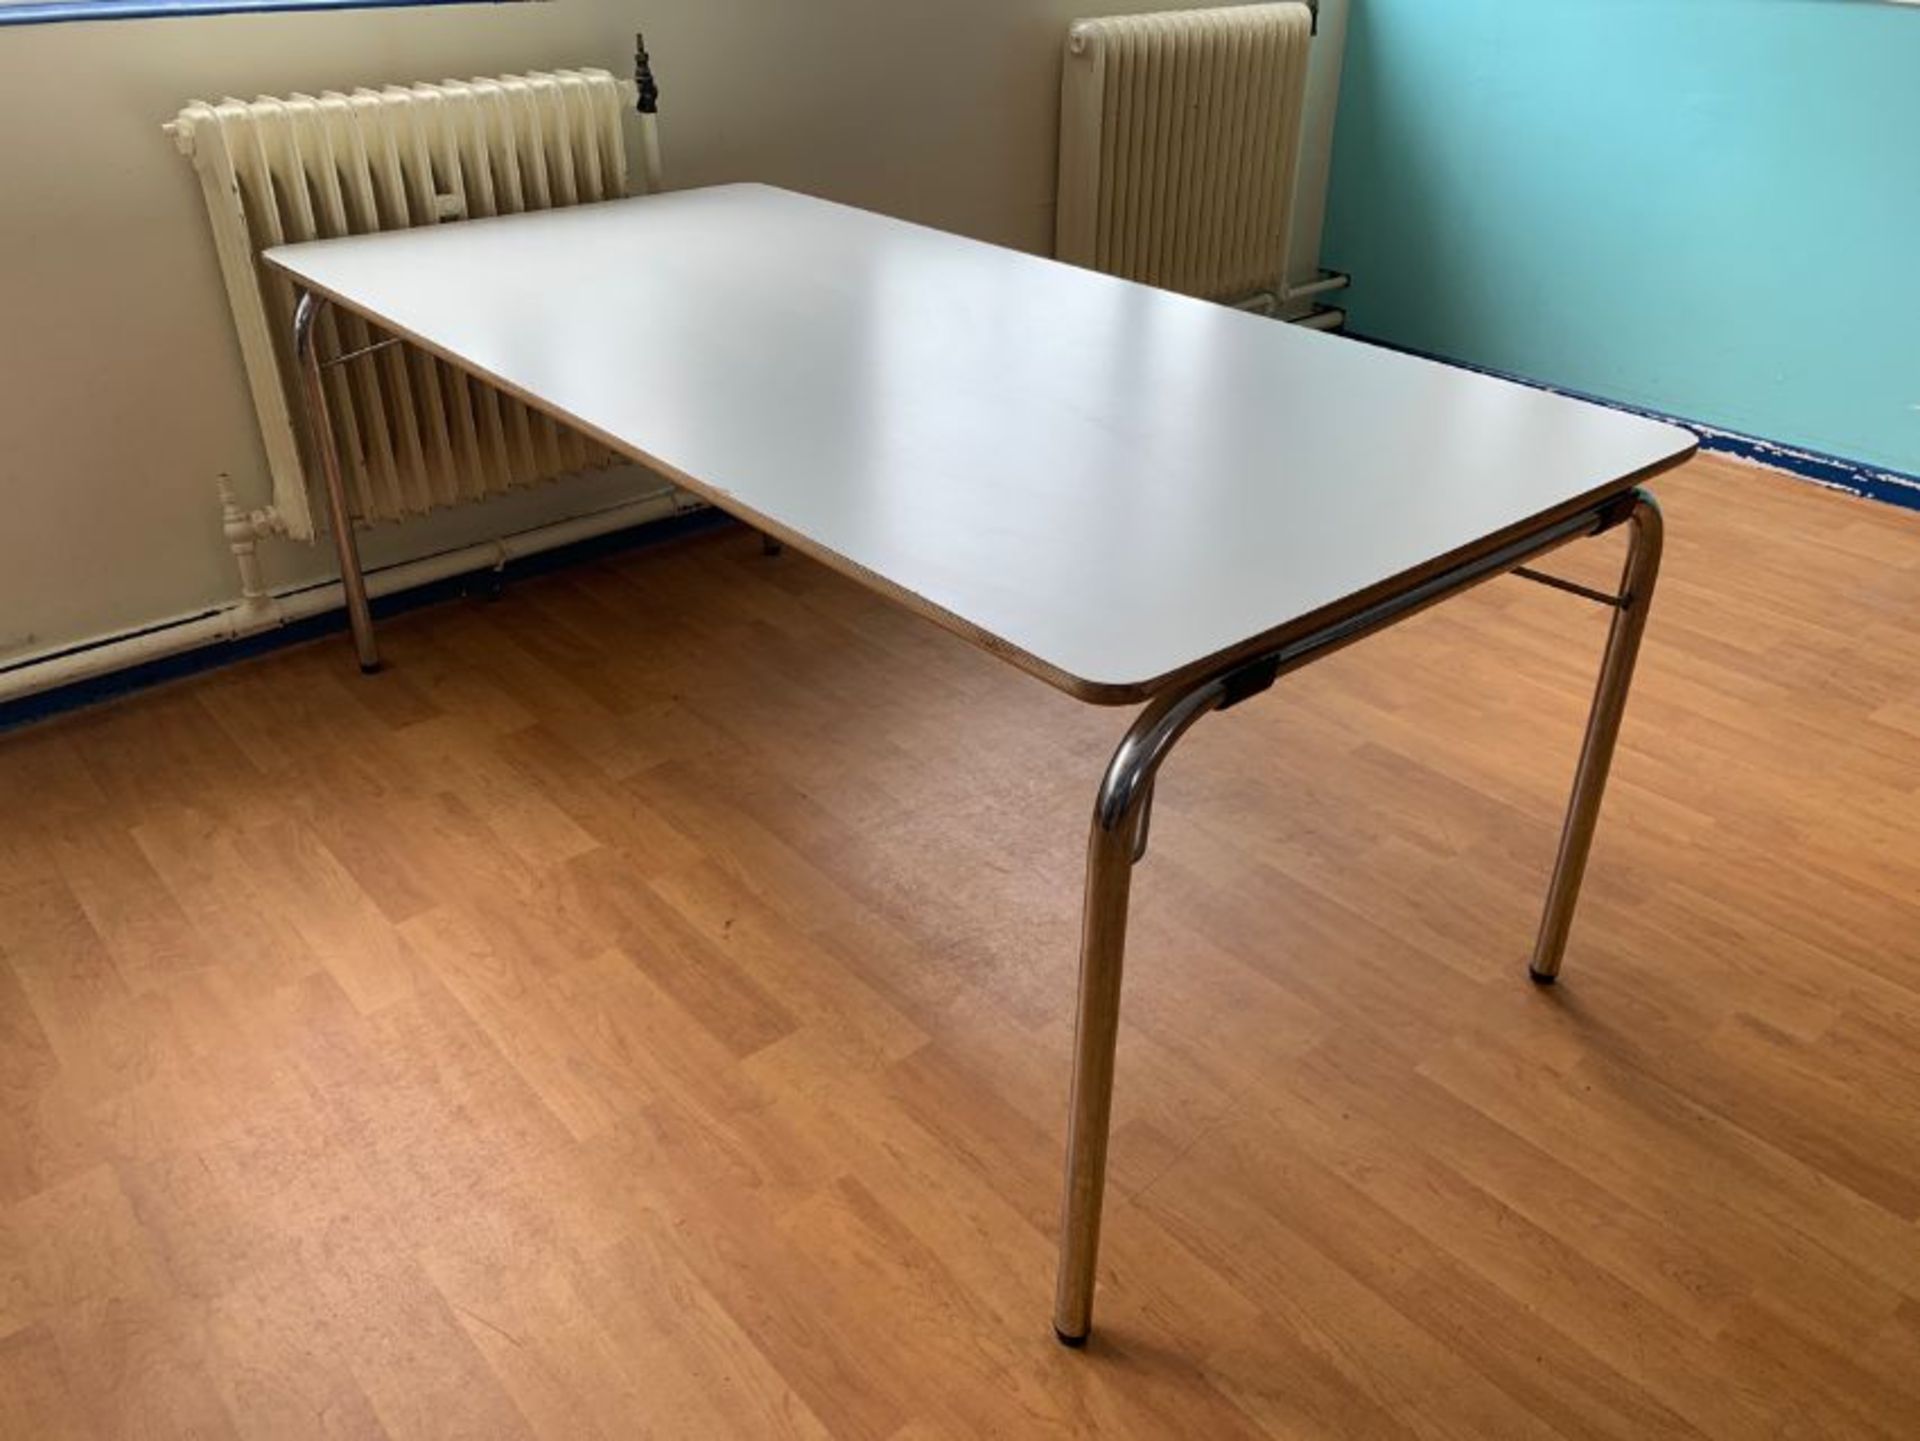 Rectangular Table with Foldable Legs - Image 4 of 8